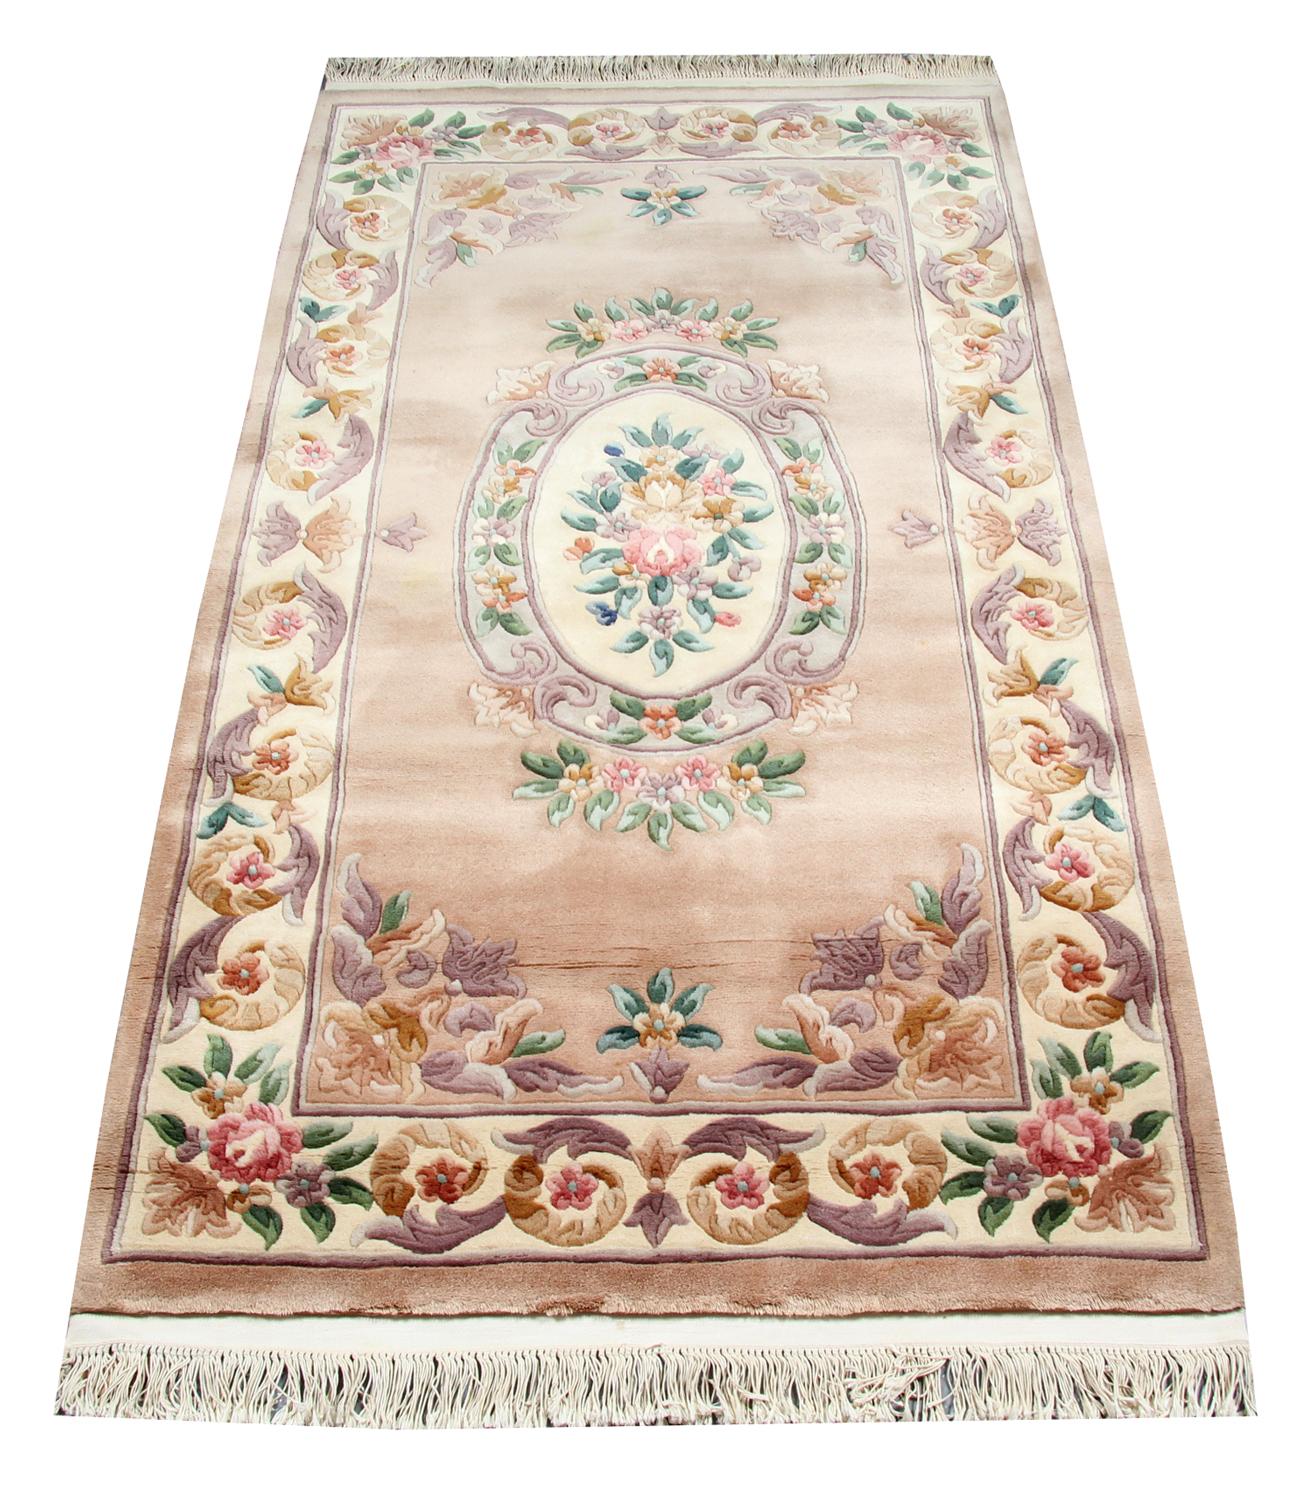 This elegant handmade carpet was constructed in the 1960s in China. The central design has been woven on a peach/ pink field with orange, purple and green accent colours that make up the floral medallion and the symmetrical surrounding design. This